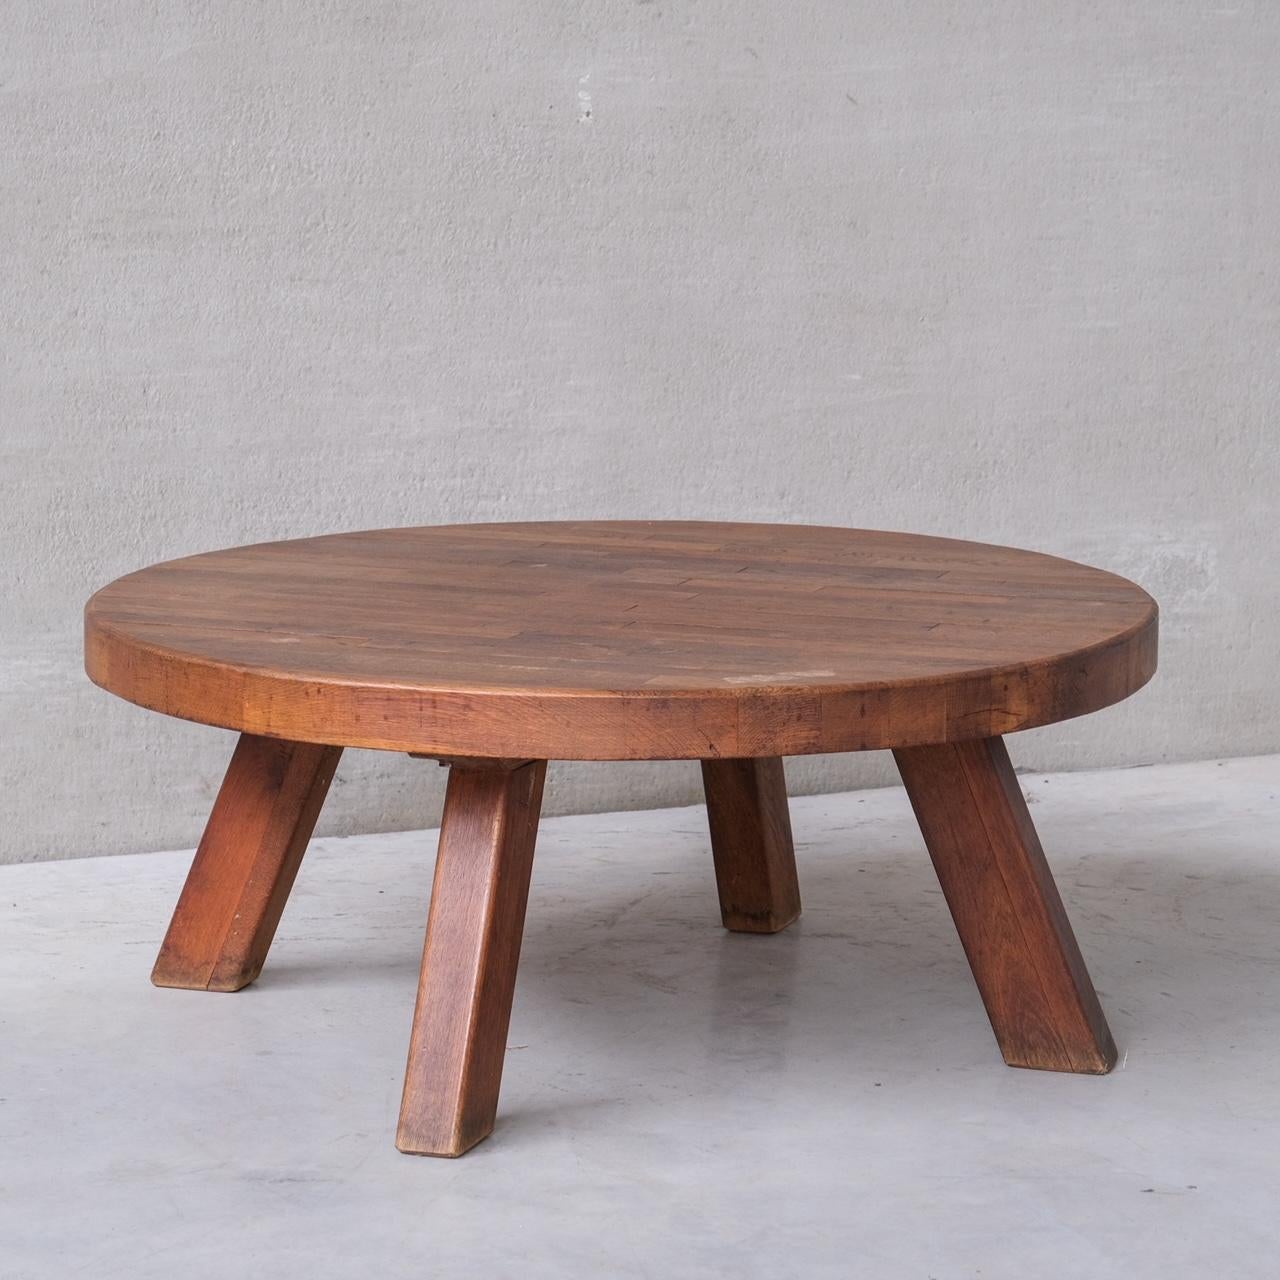 A large oak coffee table.

Belgium, c1970s.

Chunky top, raised over four legs.

Good vintage condition, some scuffs and wear commensurate with age.

Location: Belgium Gallery.

Dimensions: 49 H x 115 Diameter in cm.

Delivery: POA

We can ship